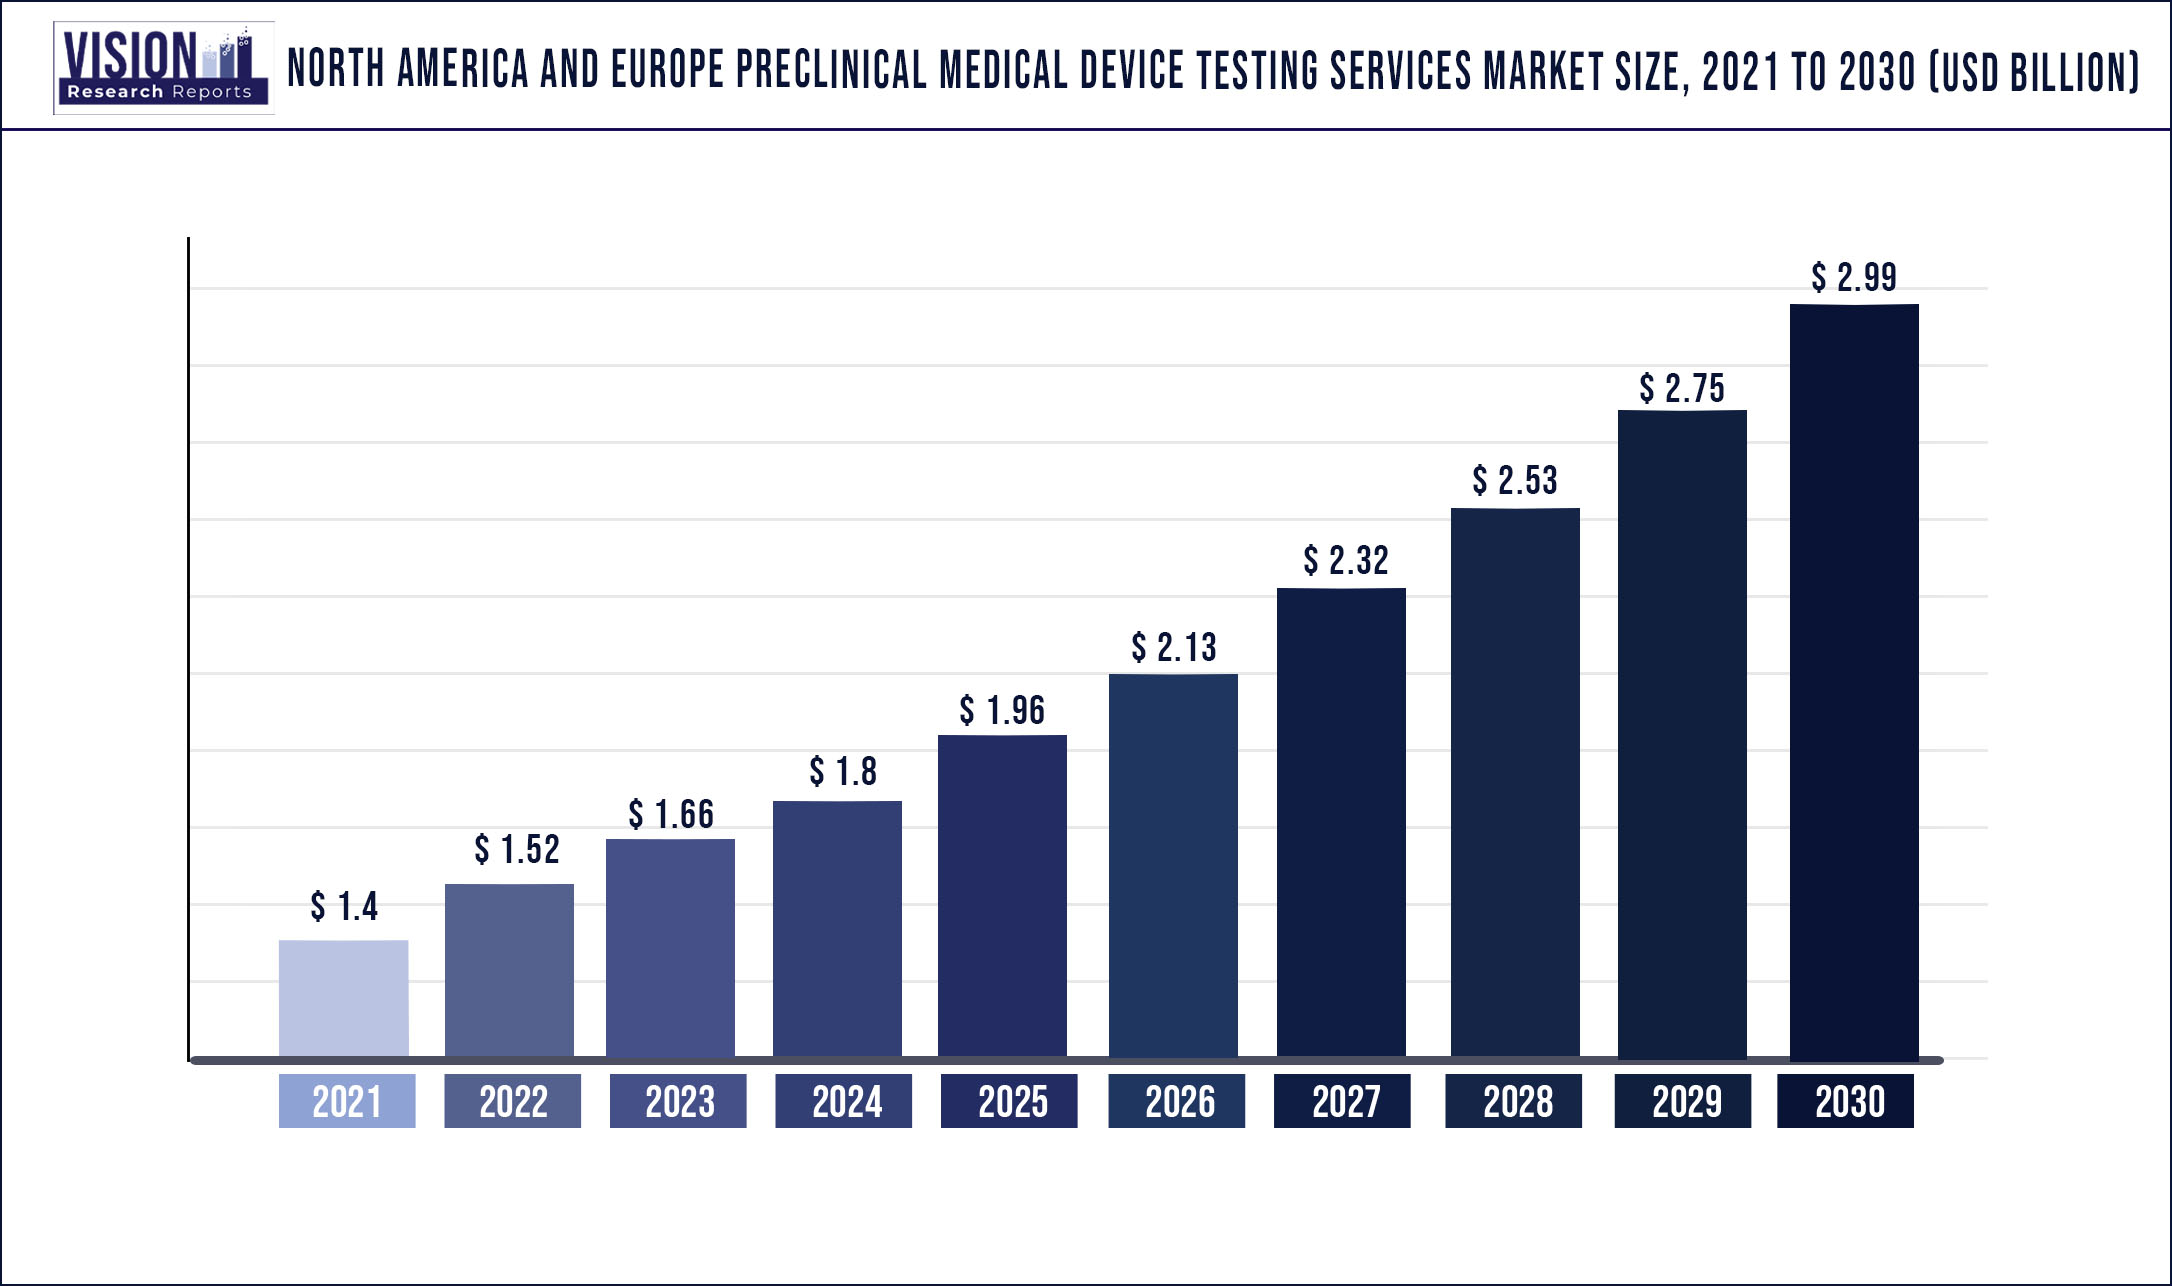 North America And Europe Preclinical Medical Device Testing Services Market Size 2021 to 2030